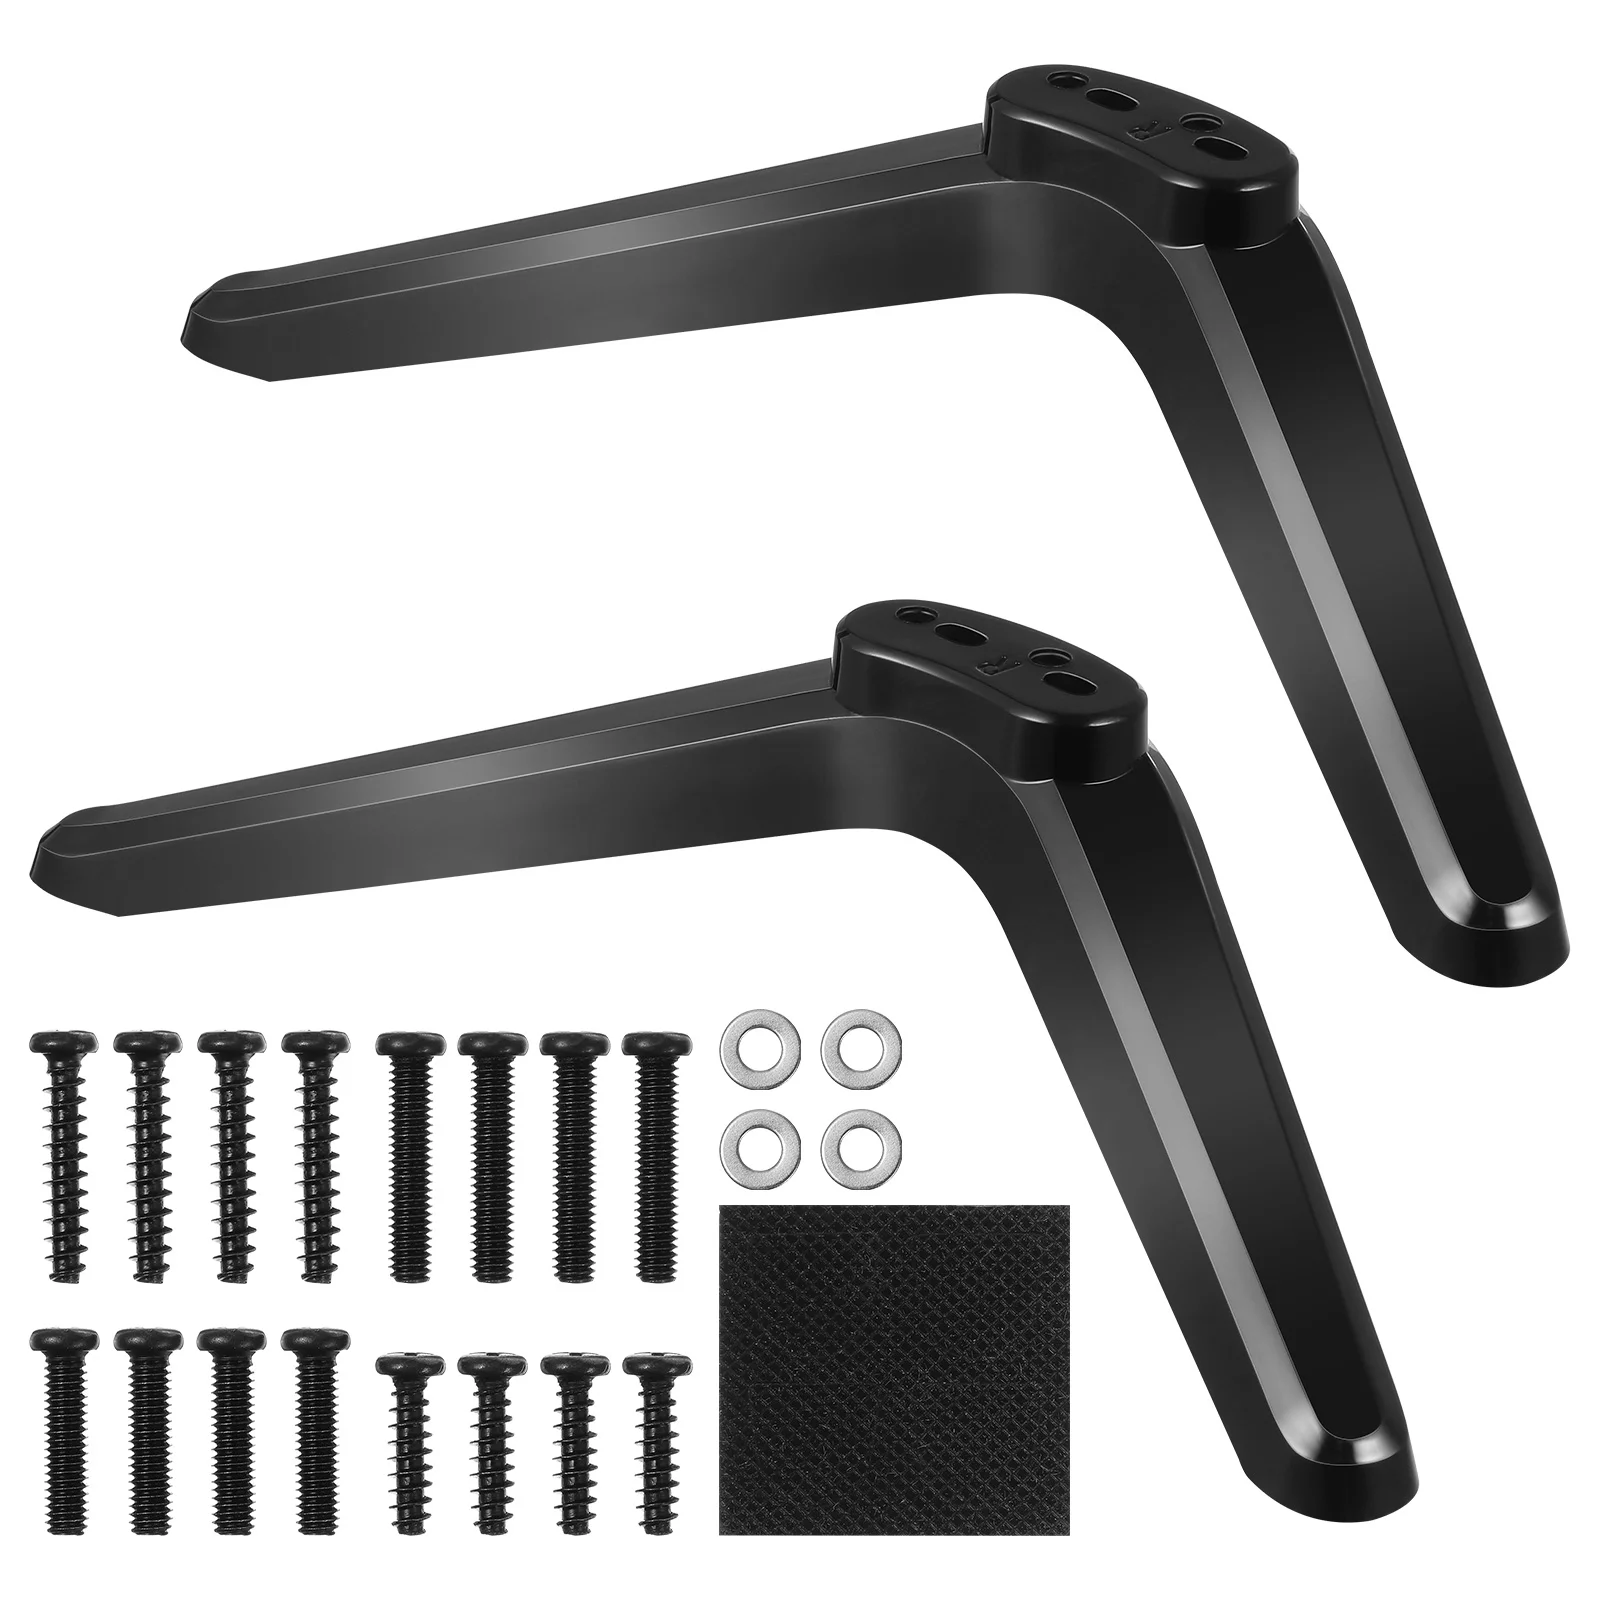 

2 Pcs Stand Mount Mounts With Bracket Table Top For Brackets Plastic Stands Television